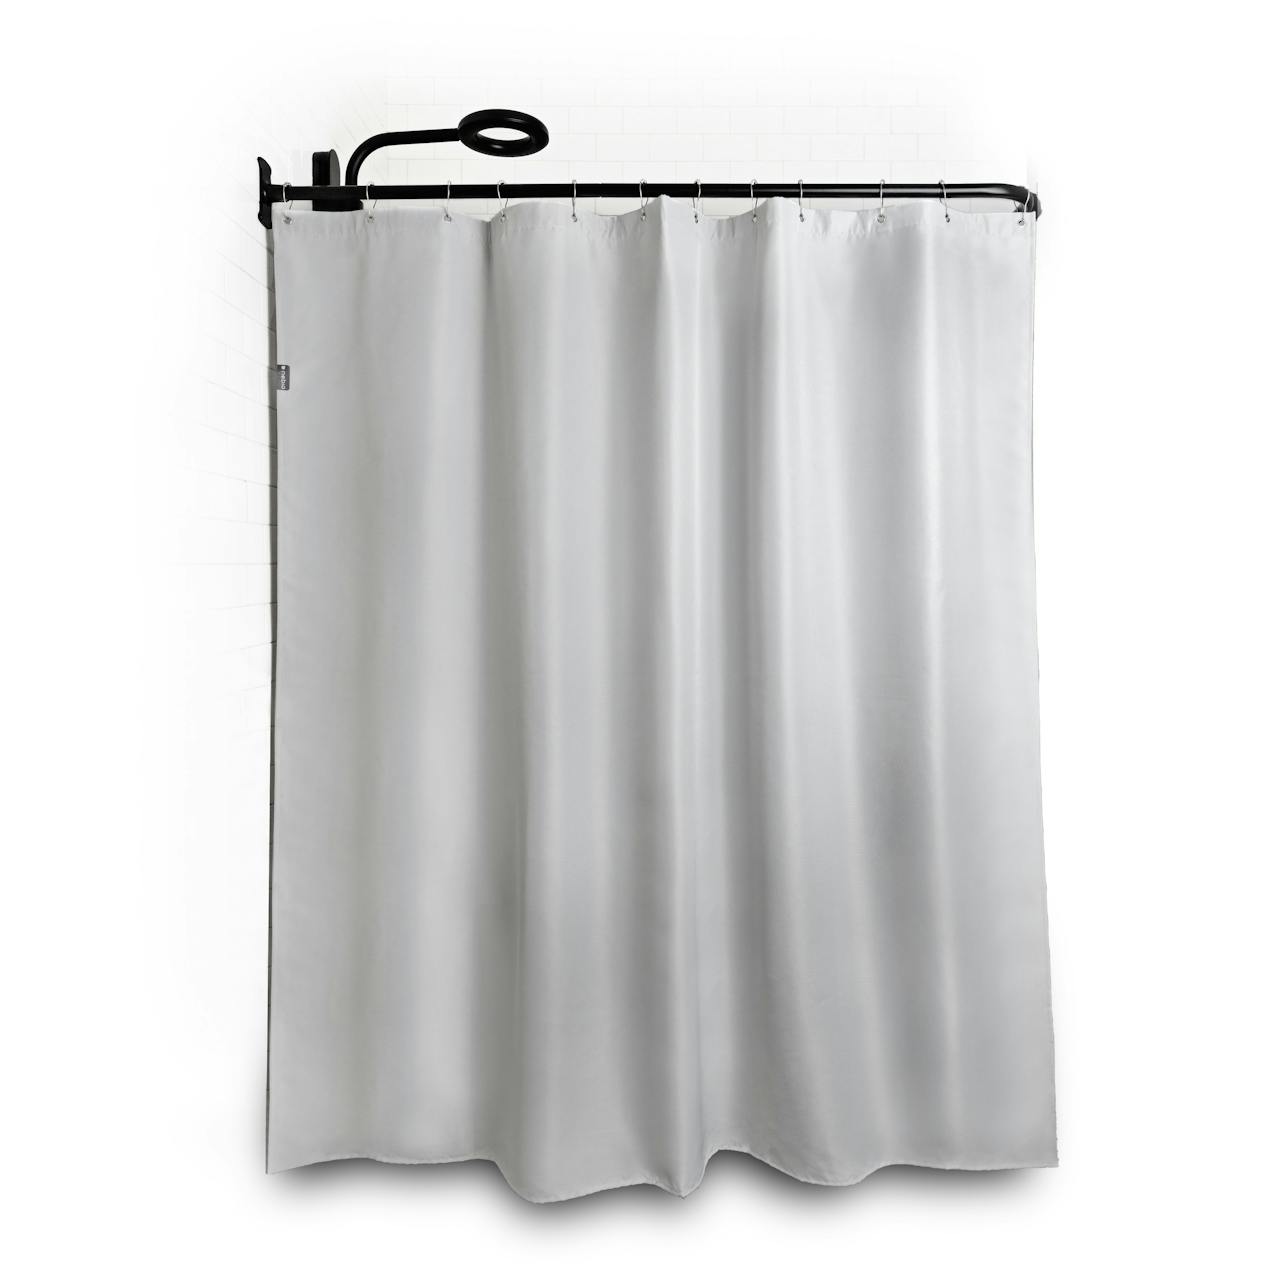 Nebia Recycled Shower Curtain